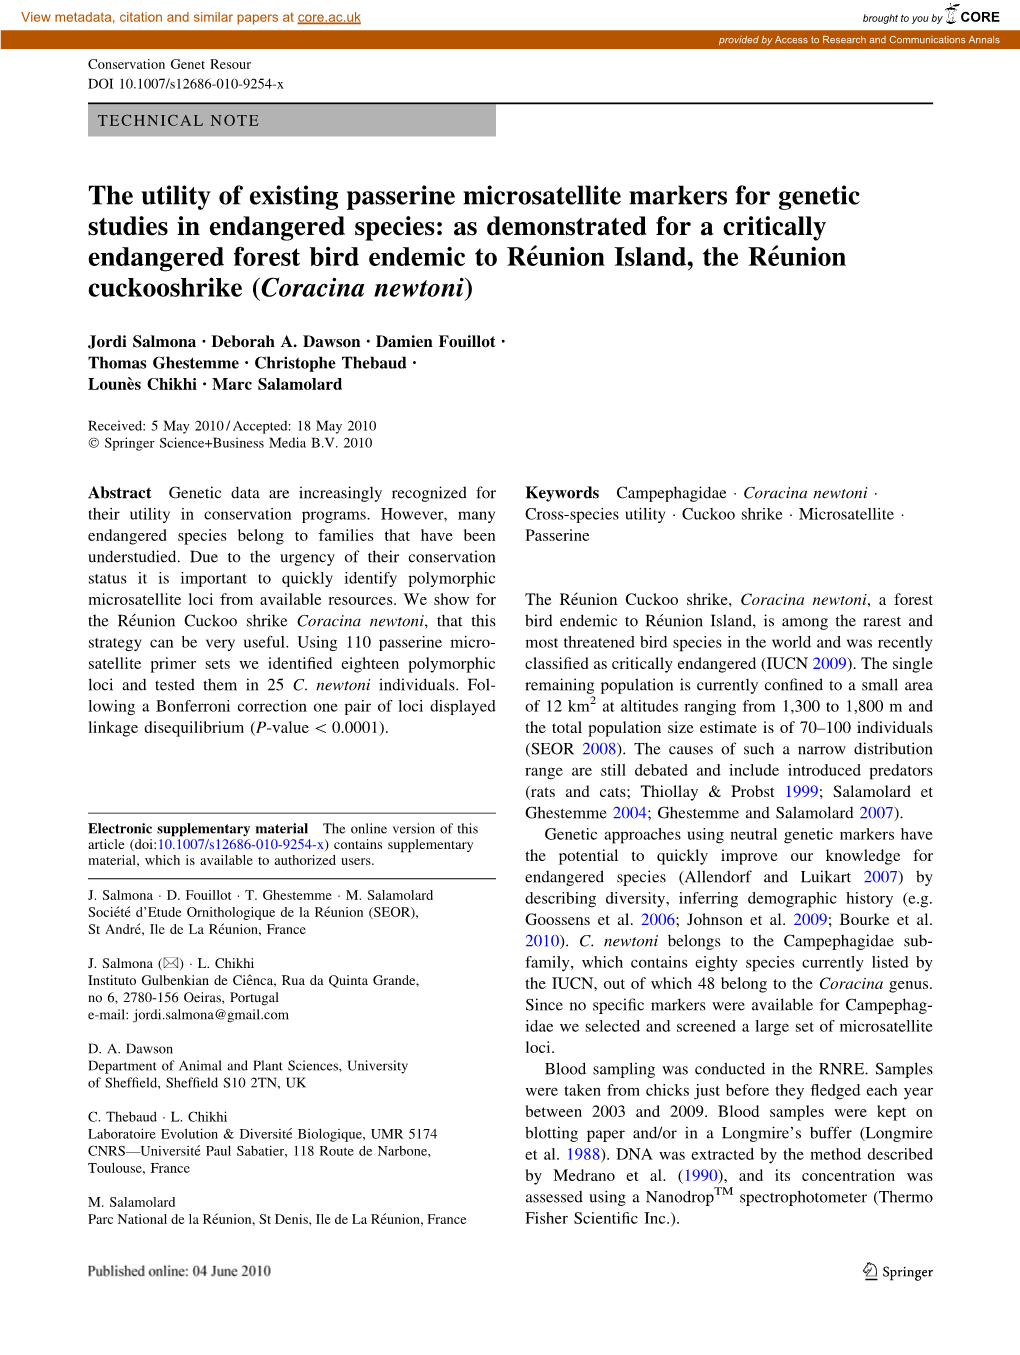 The Utility of Existing Passerine Microsatellite Markers for Genetic Studies in Endangered Species